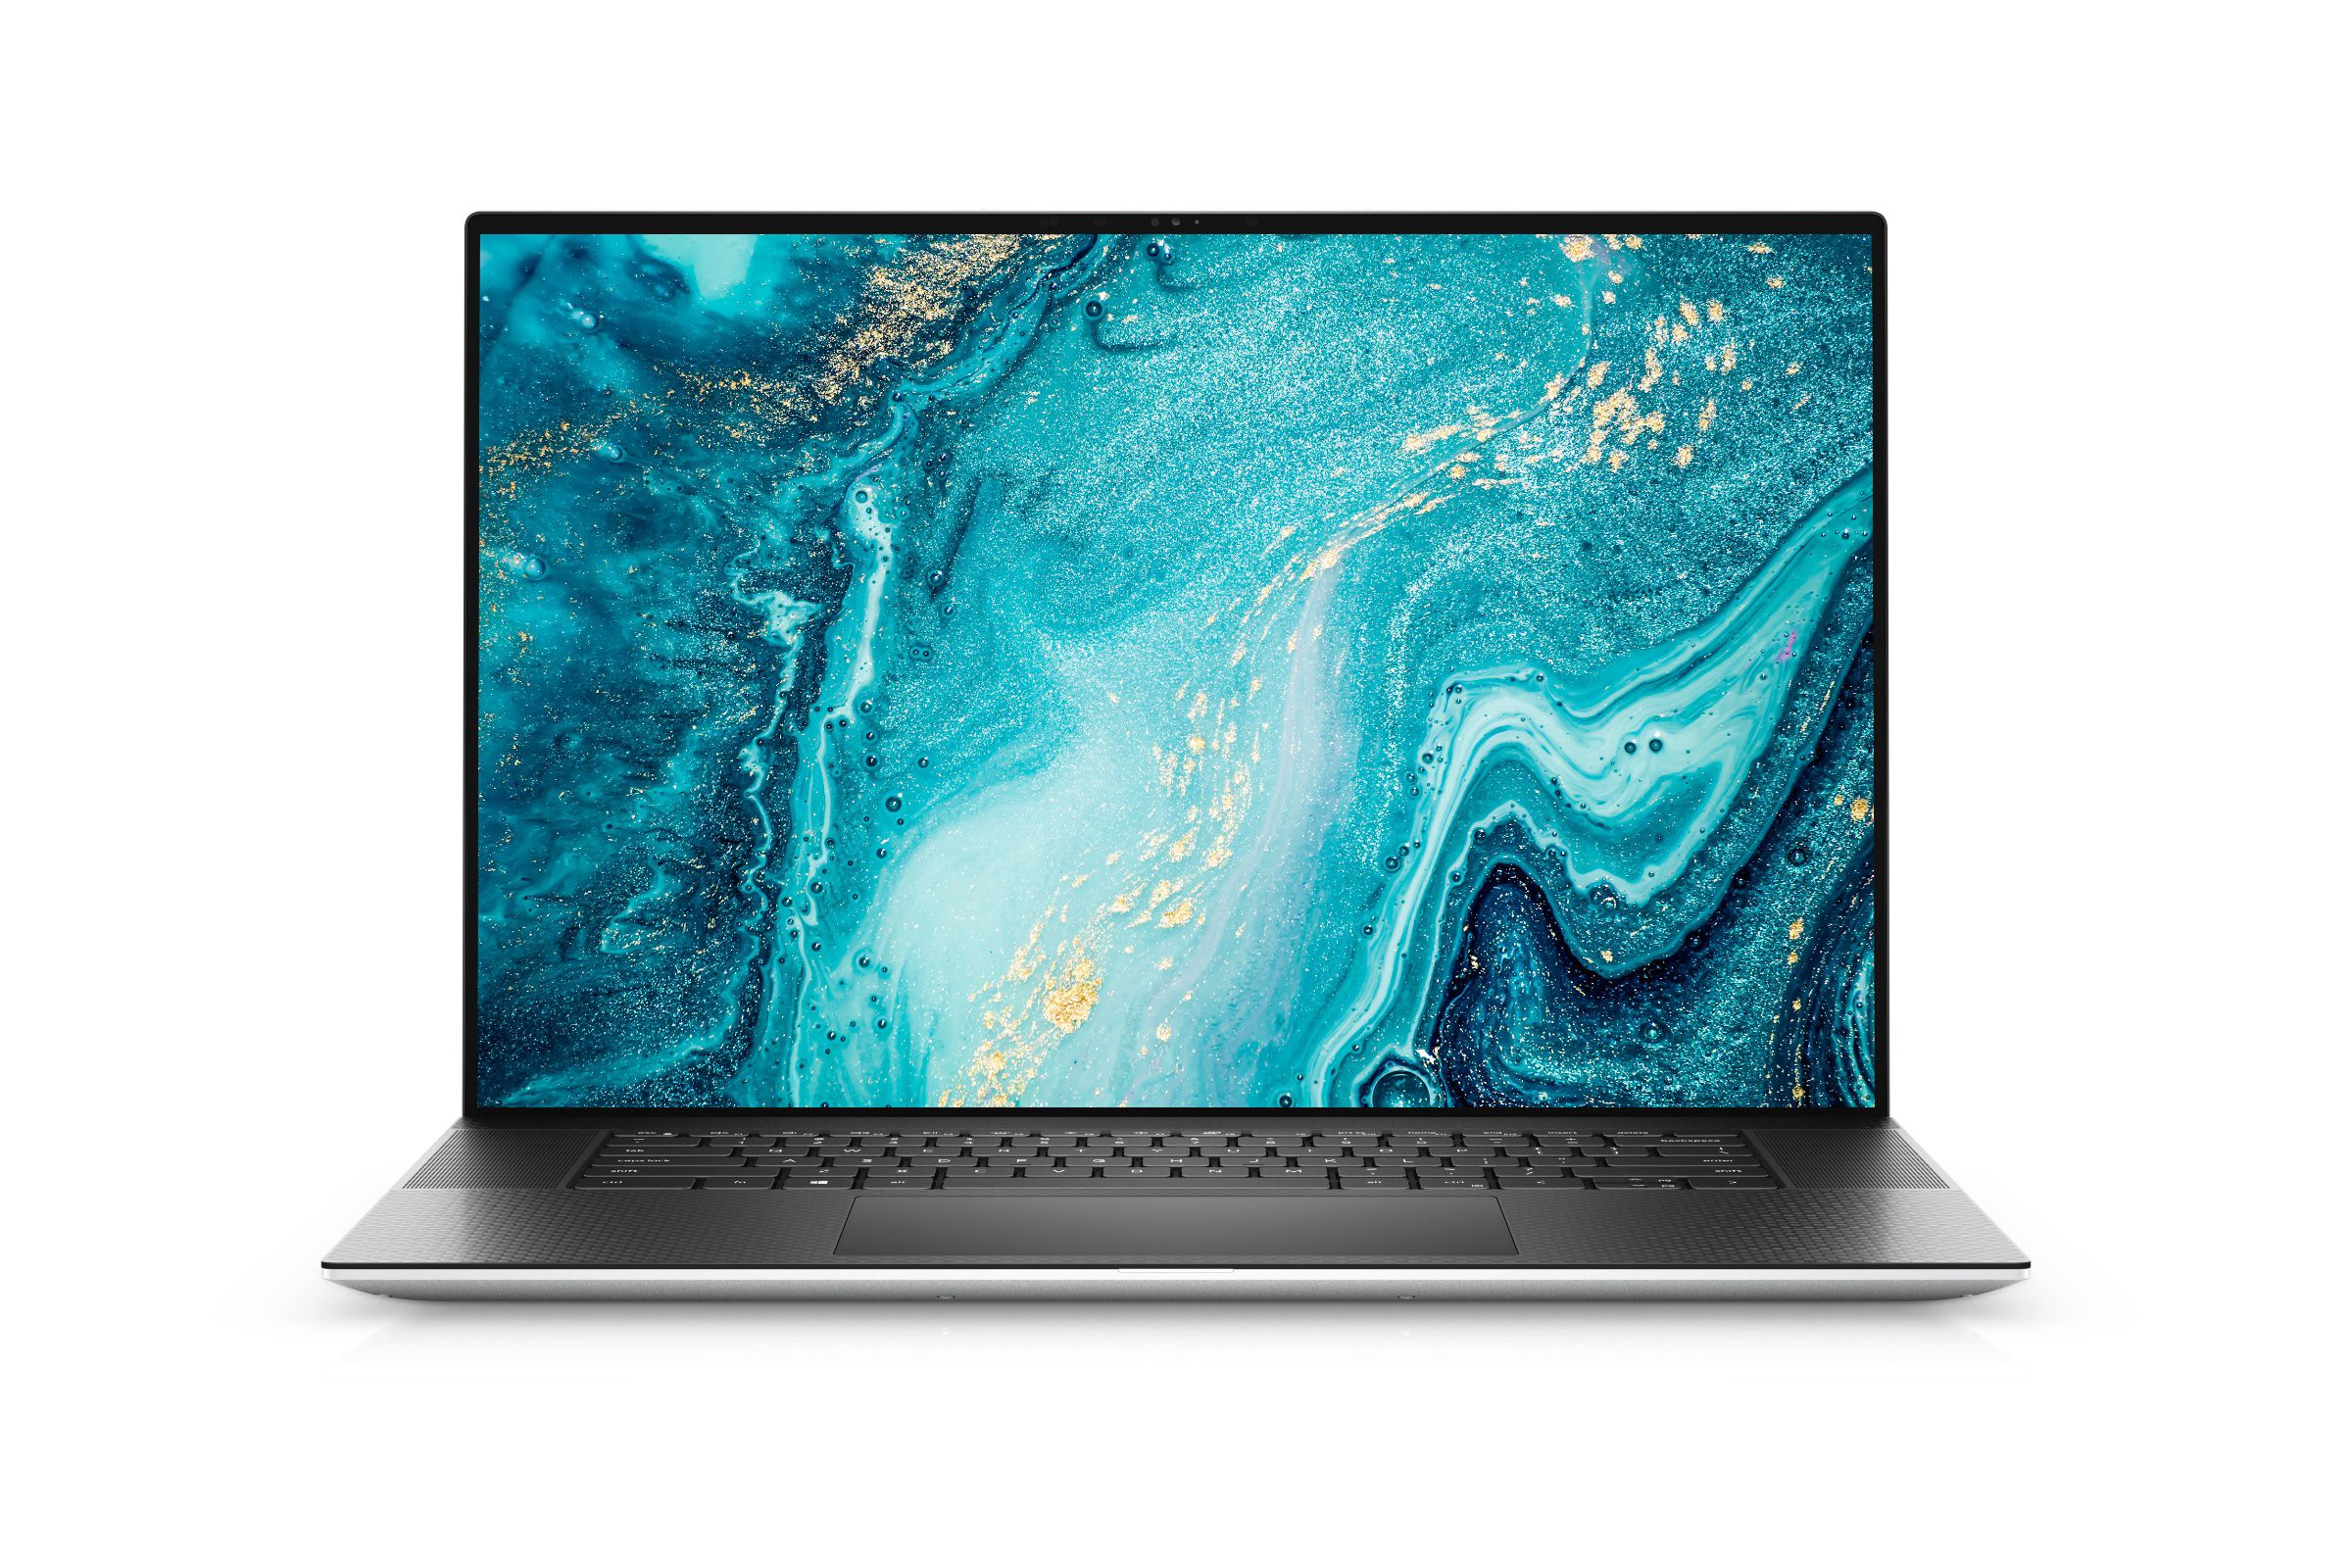 Dell’s new (familiar looking) XPS 17 for 2021